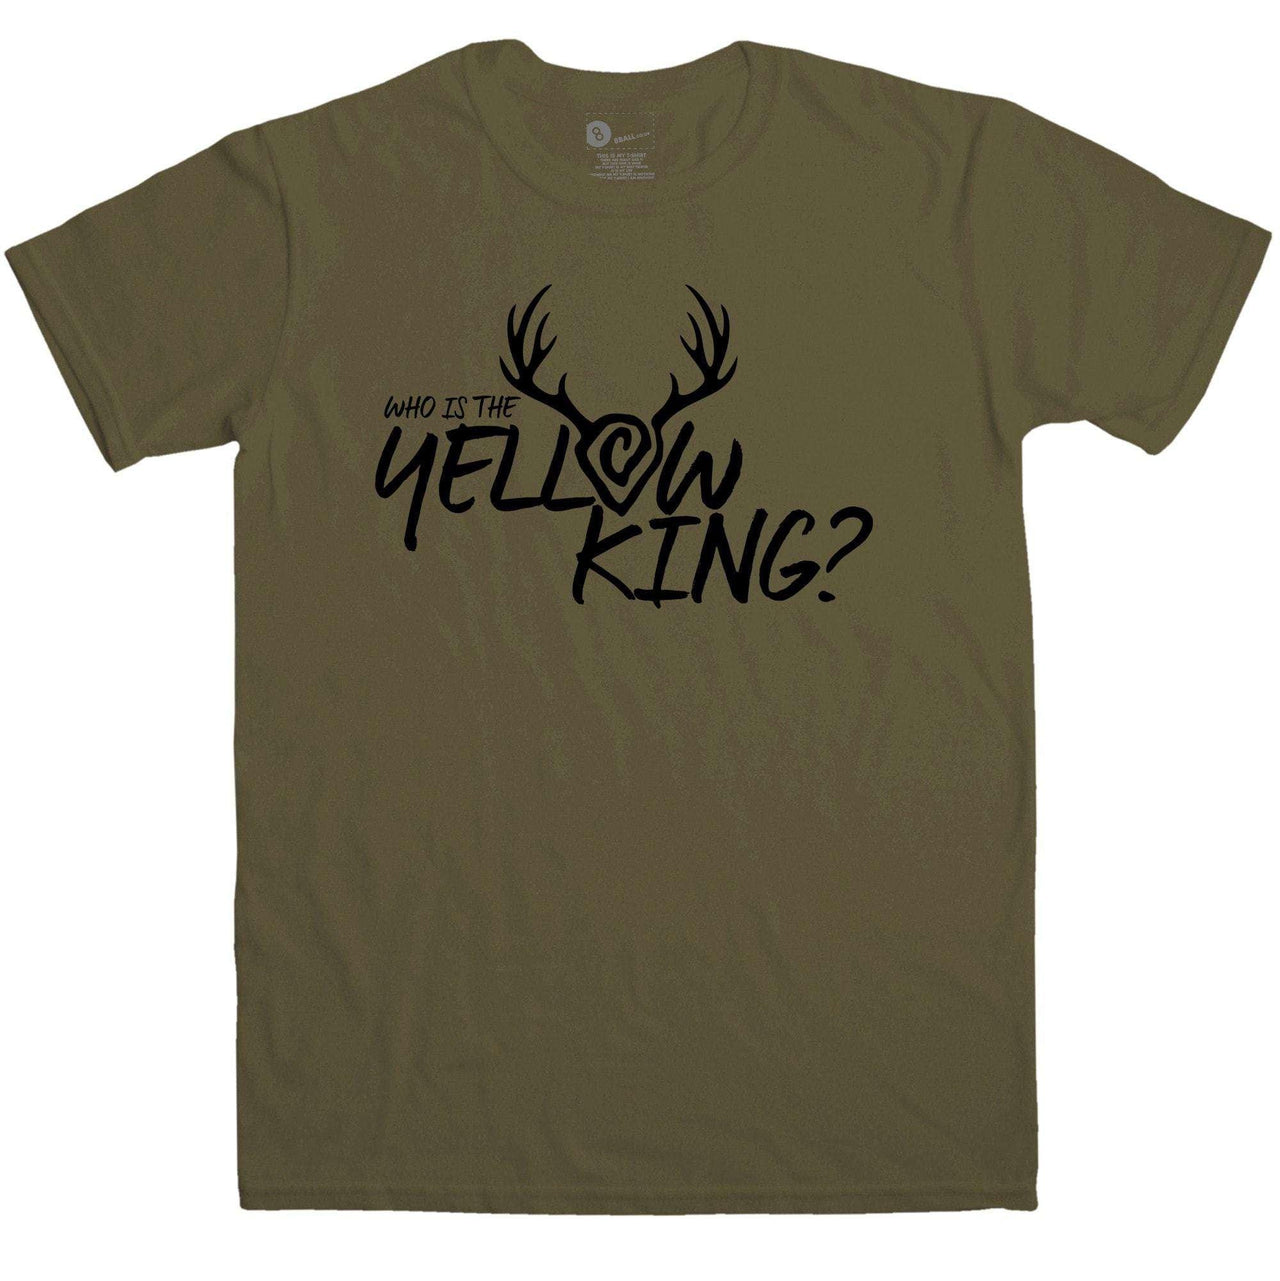 Who Is The Yellow King T-Shirt For Men 8Ball